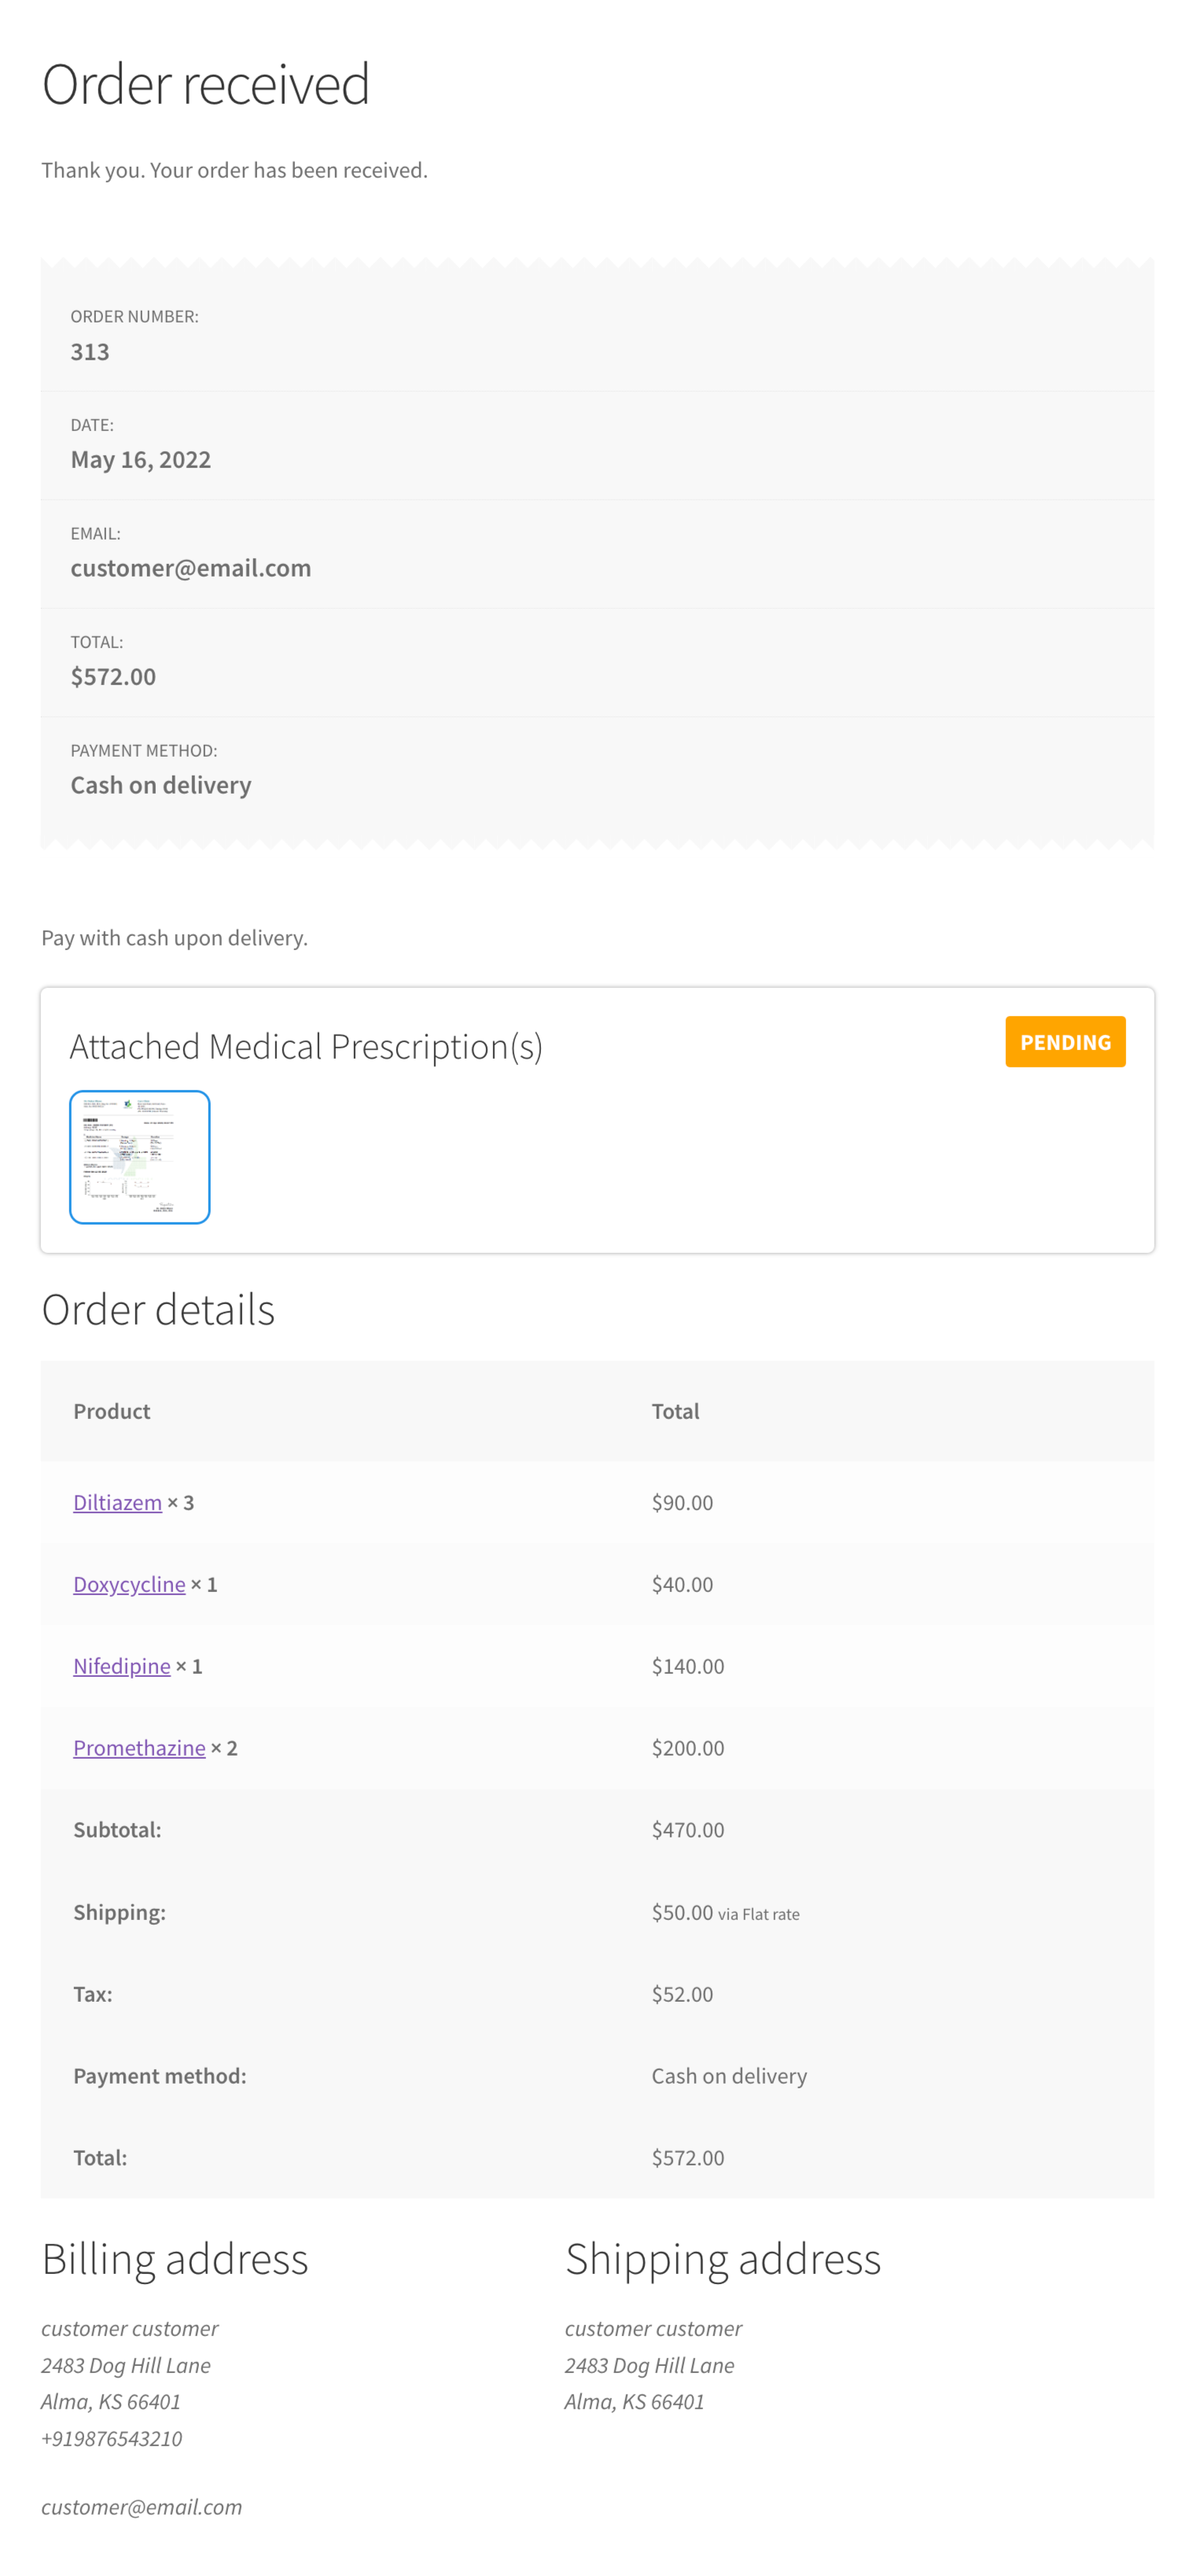 WooCommerce Medical Prescription Attachment Order Received Page